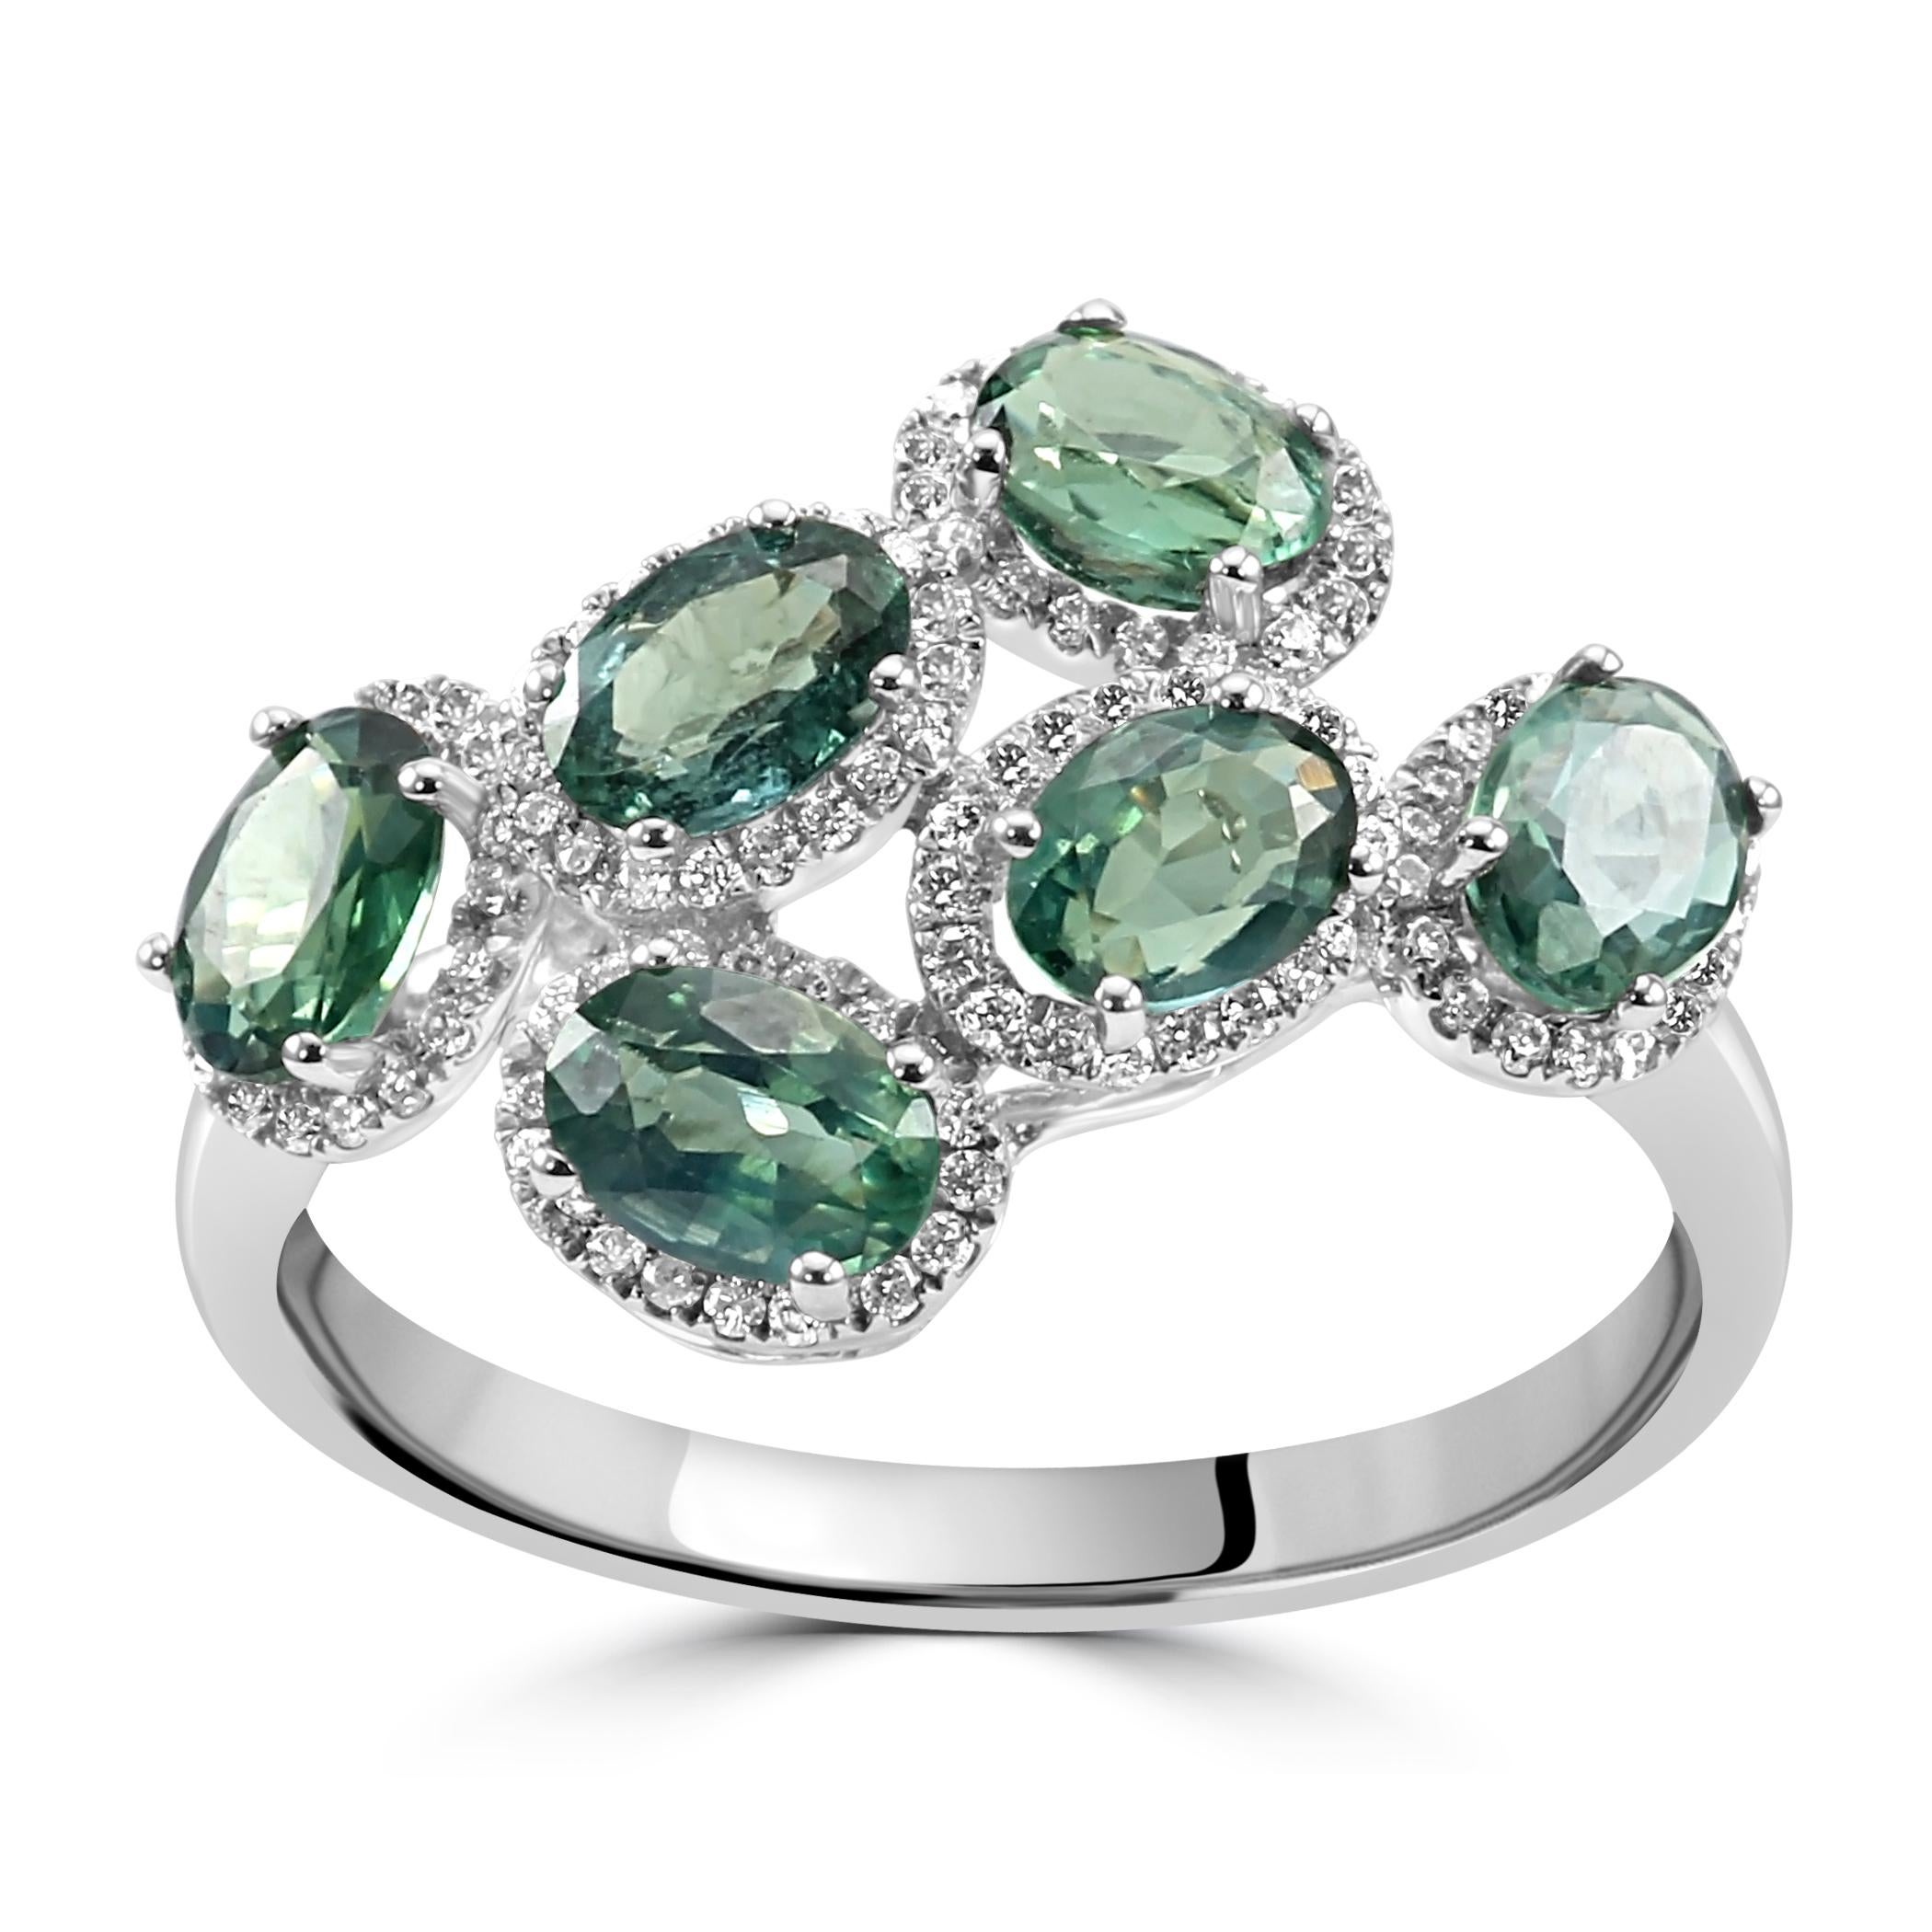 The star of this ring are the six Alexandrite Ovals, each boasting its unique color-changing properties. With a combined weight of 2.21 carats, these gems showcase a delightful interplay of hues, transitioning from vibrant greens to purples under